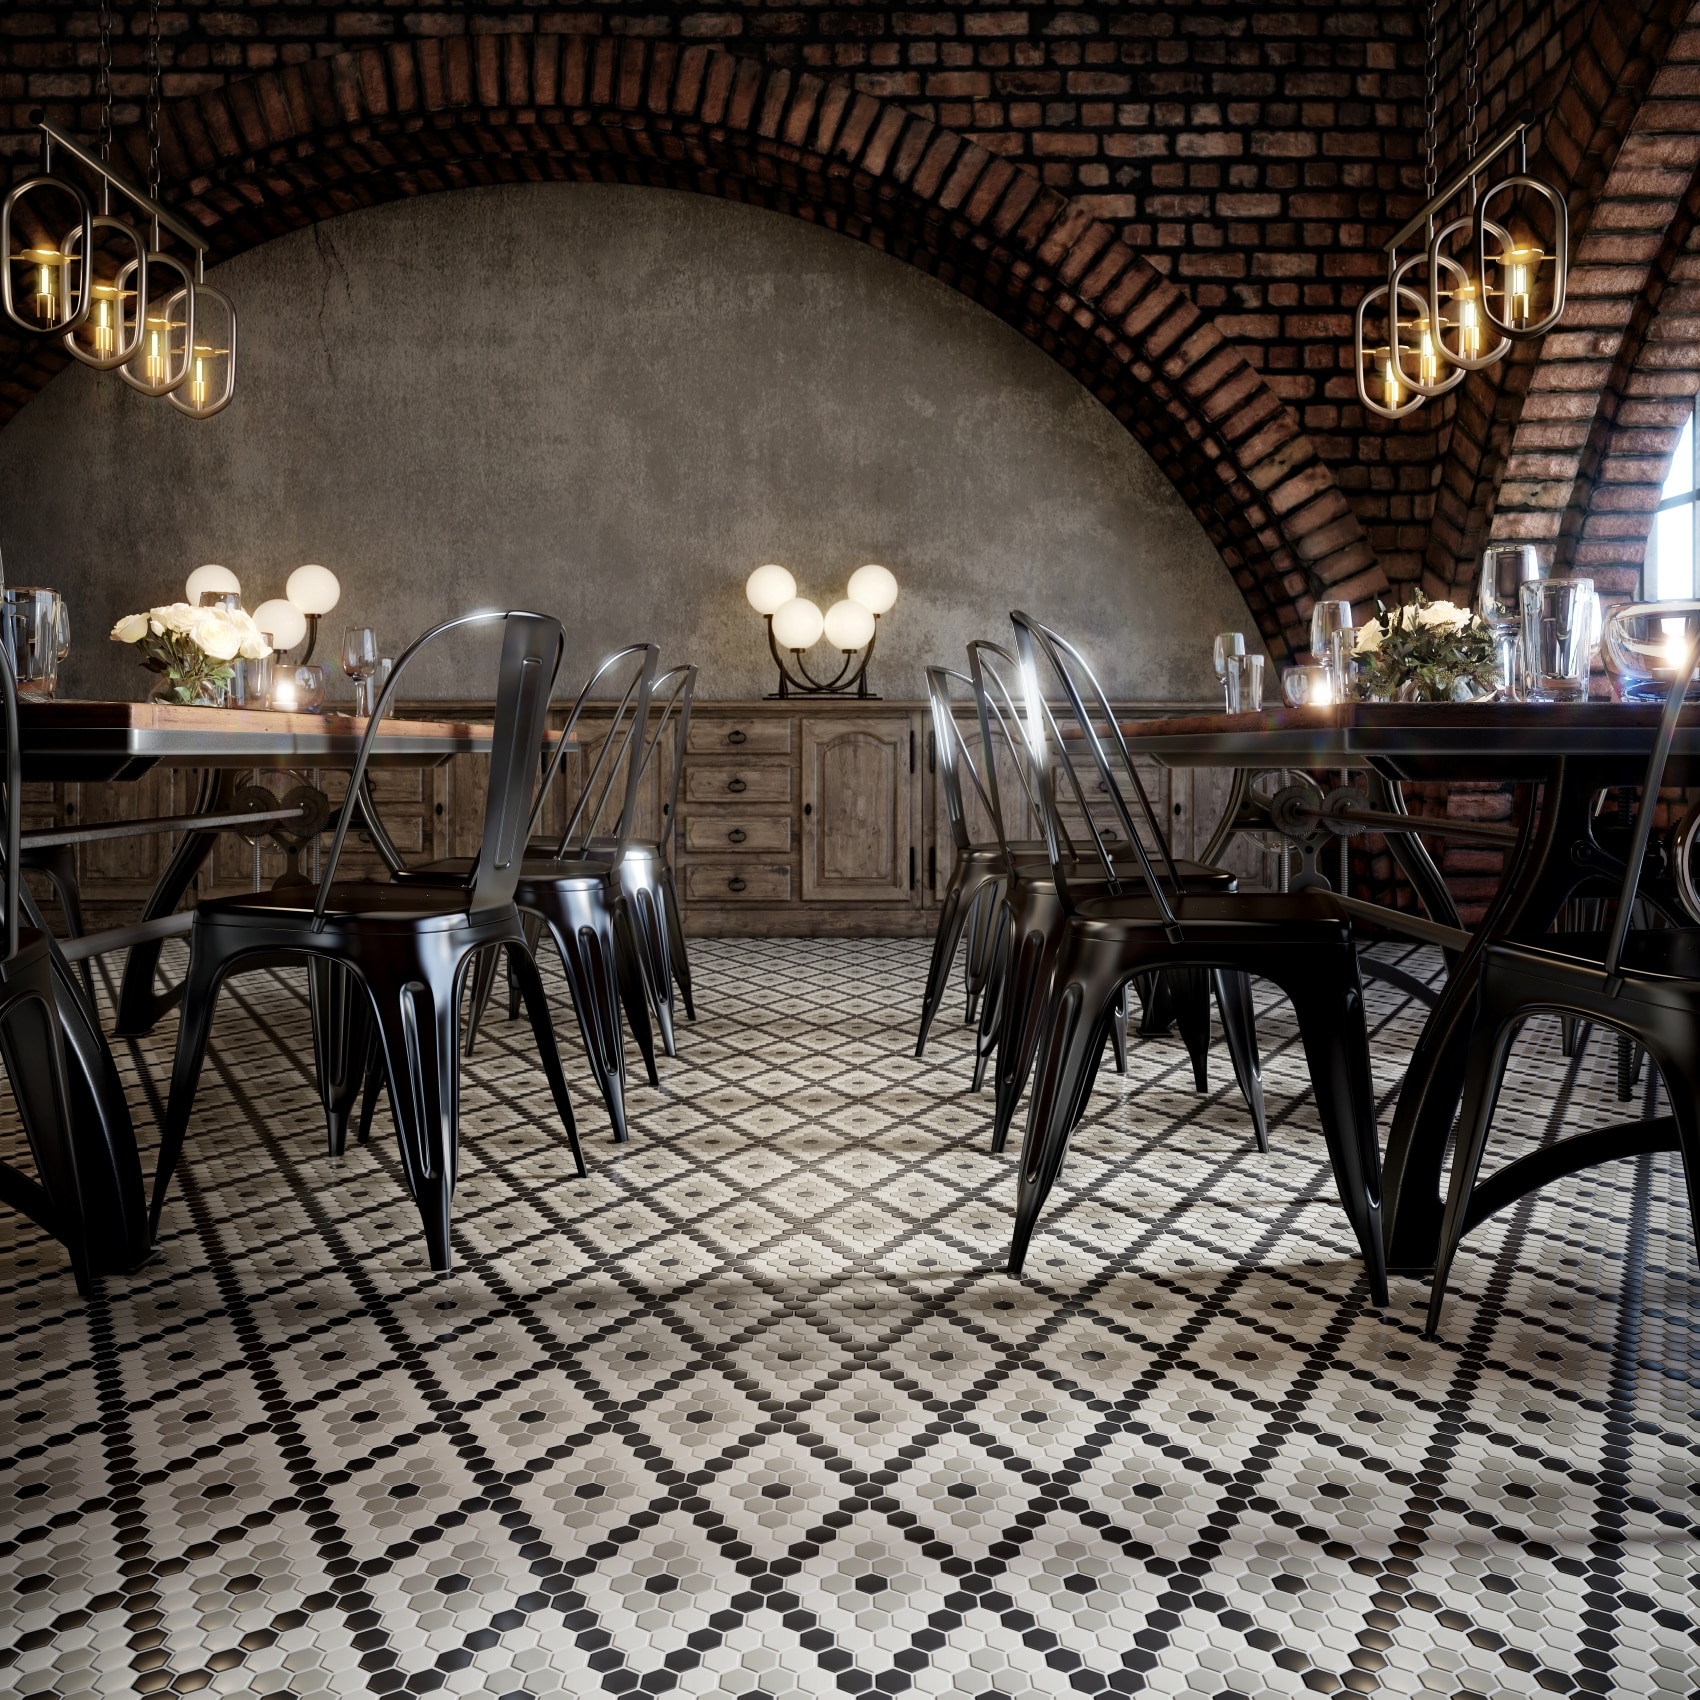 Restaurant dining room with brick arched walls, metal chairs and mosaic patterned floor.